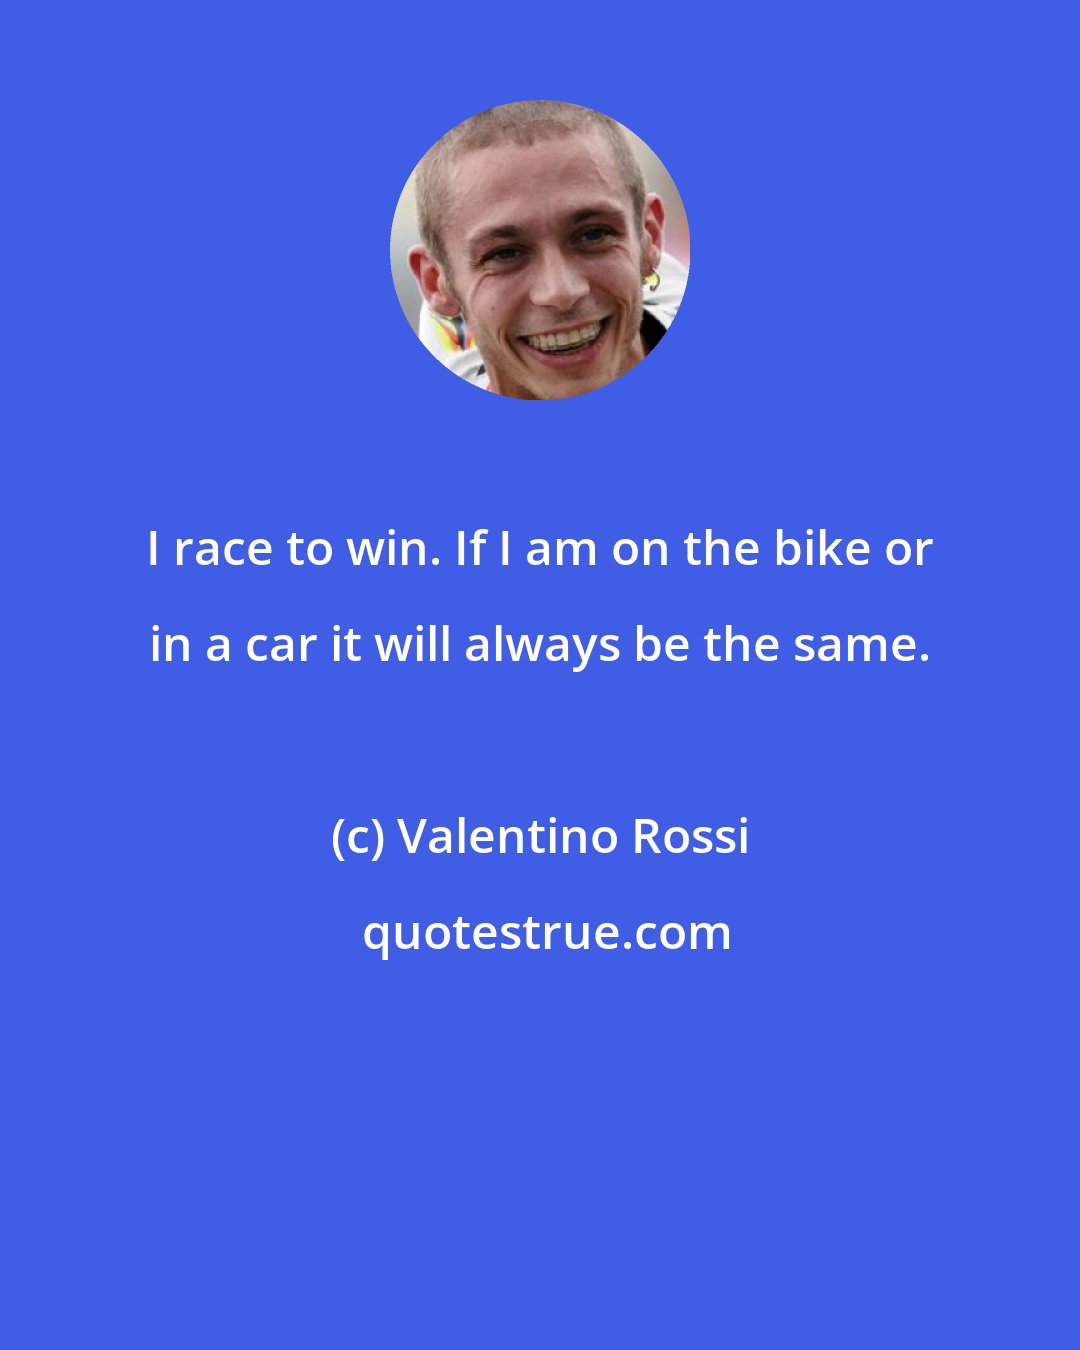 Valentino Rossi: I race to win. If I am on the bike or in a car it will always be the same.